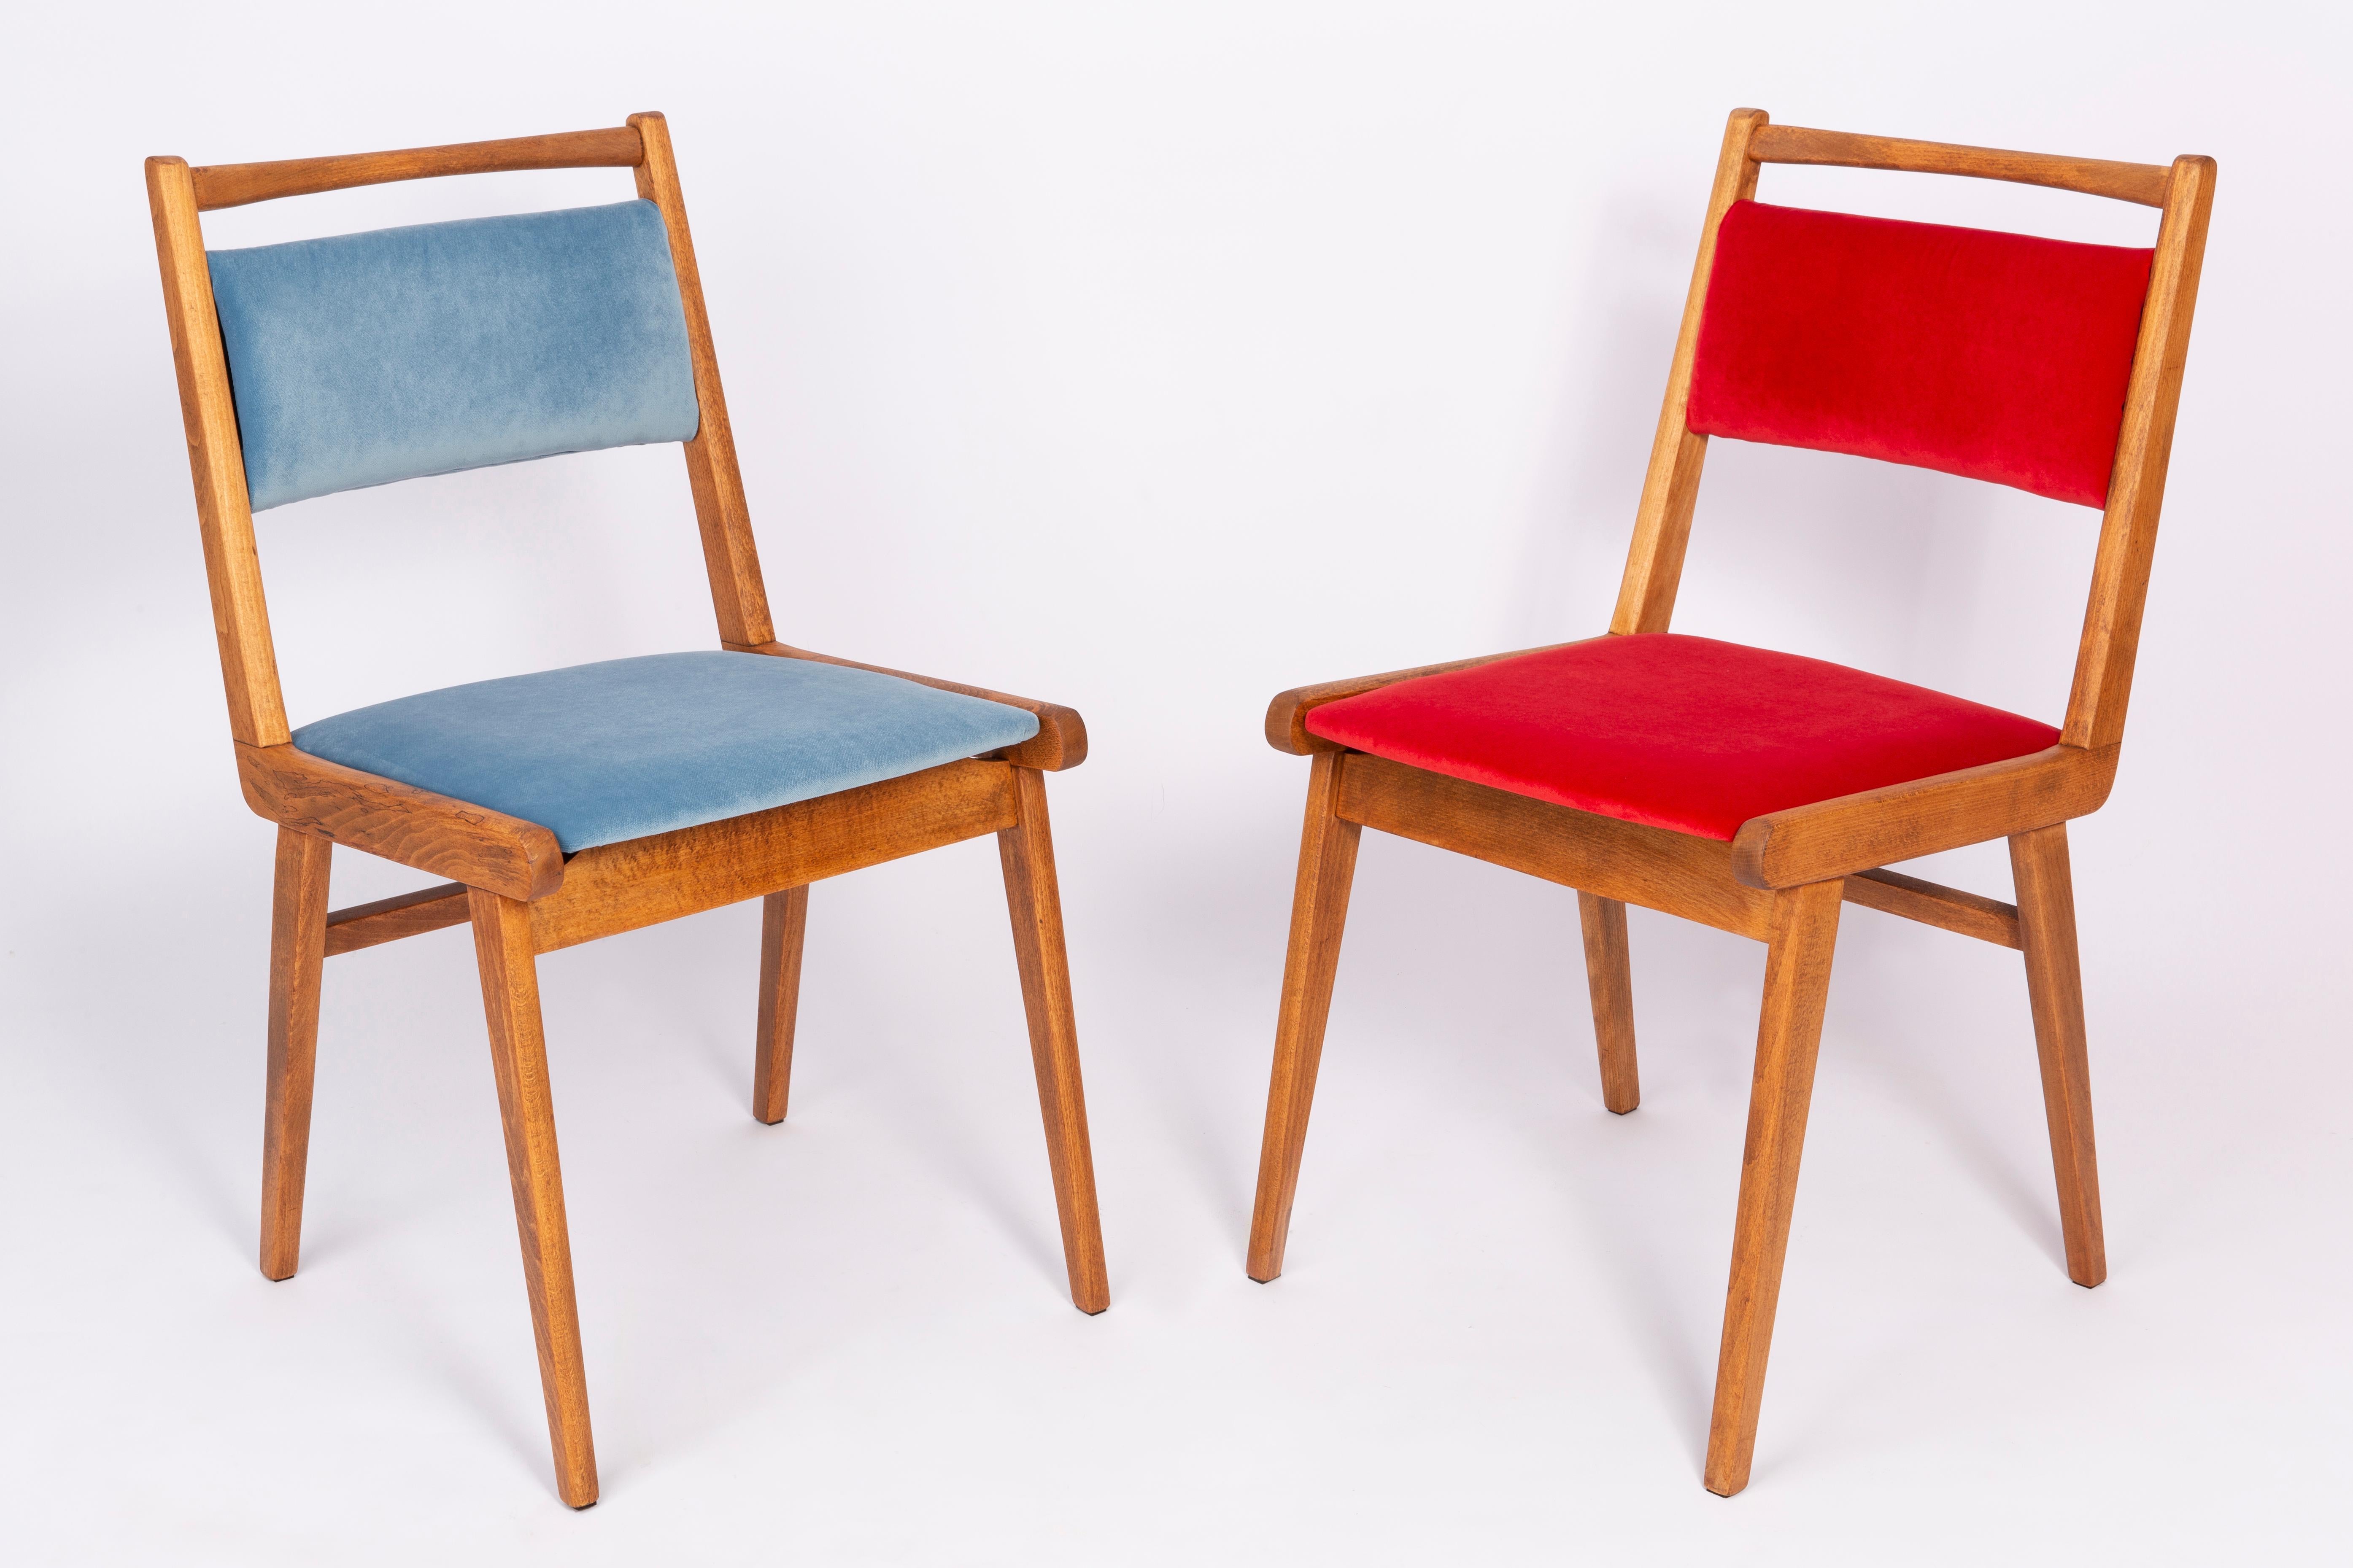 Chairs designed by Prof. Rajmund Halas. It is JAR type model. Made of beechwood. Chairs are after a complete upholstery renovation; the woodwork has been refreshed. Seat and back is dressed in durable and pleasant to the touch velvet fabric. Chairs